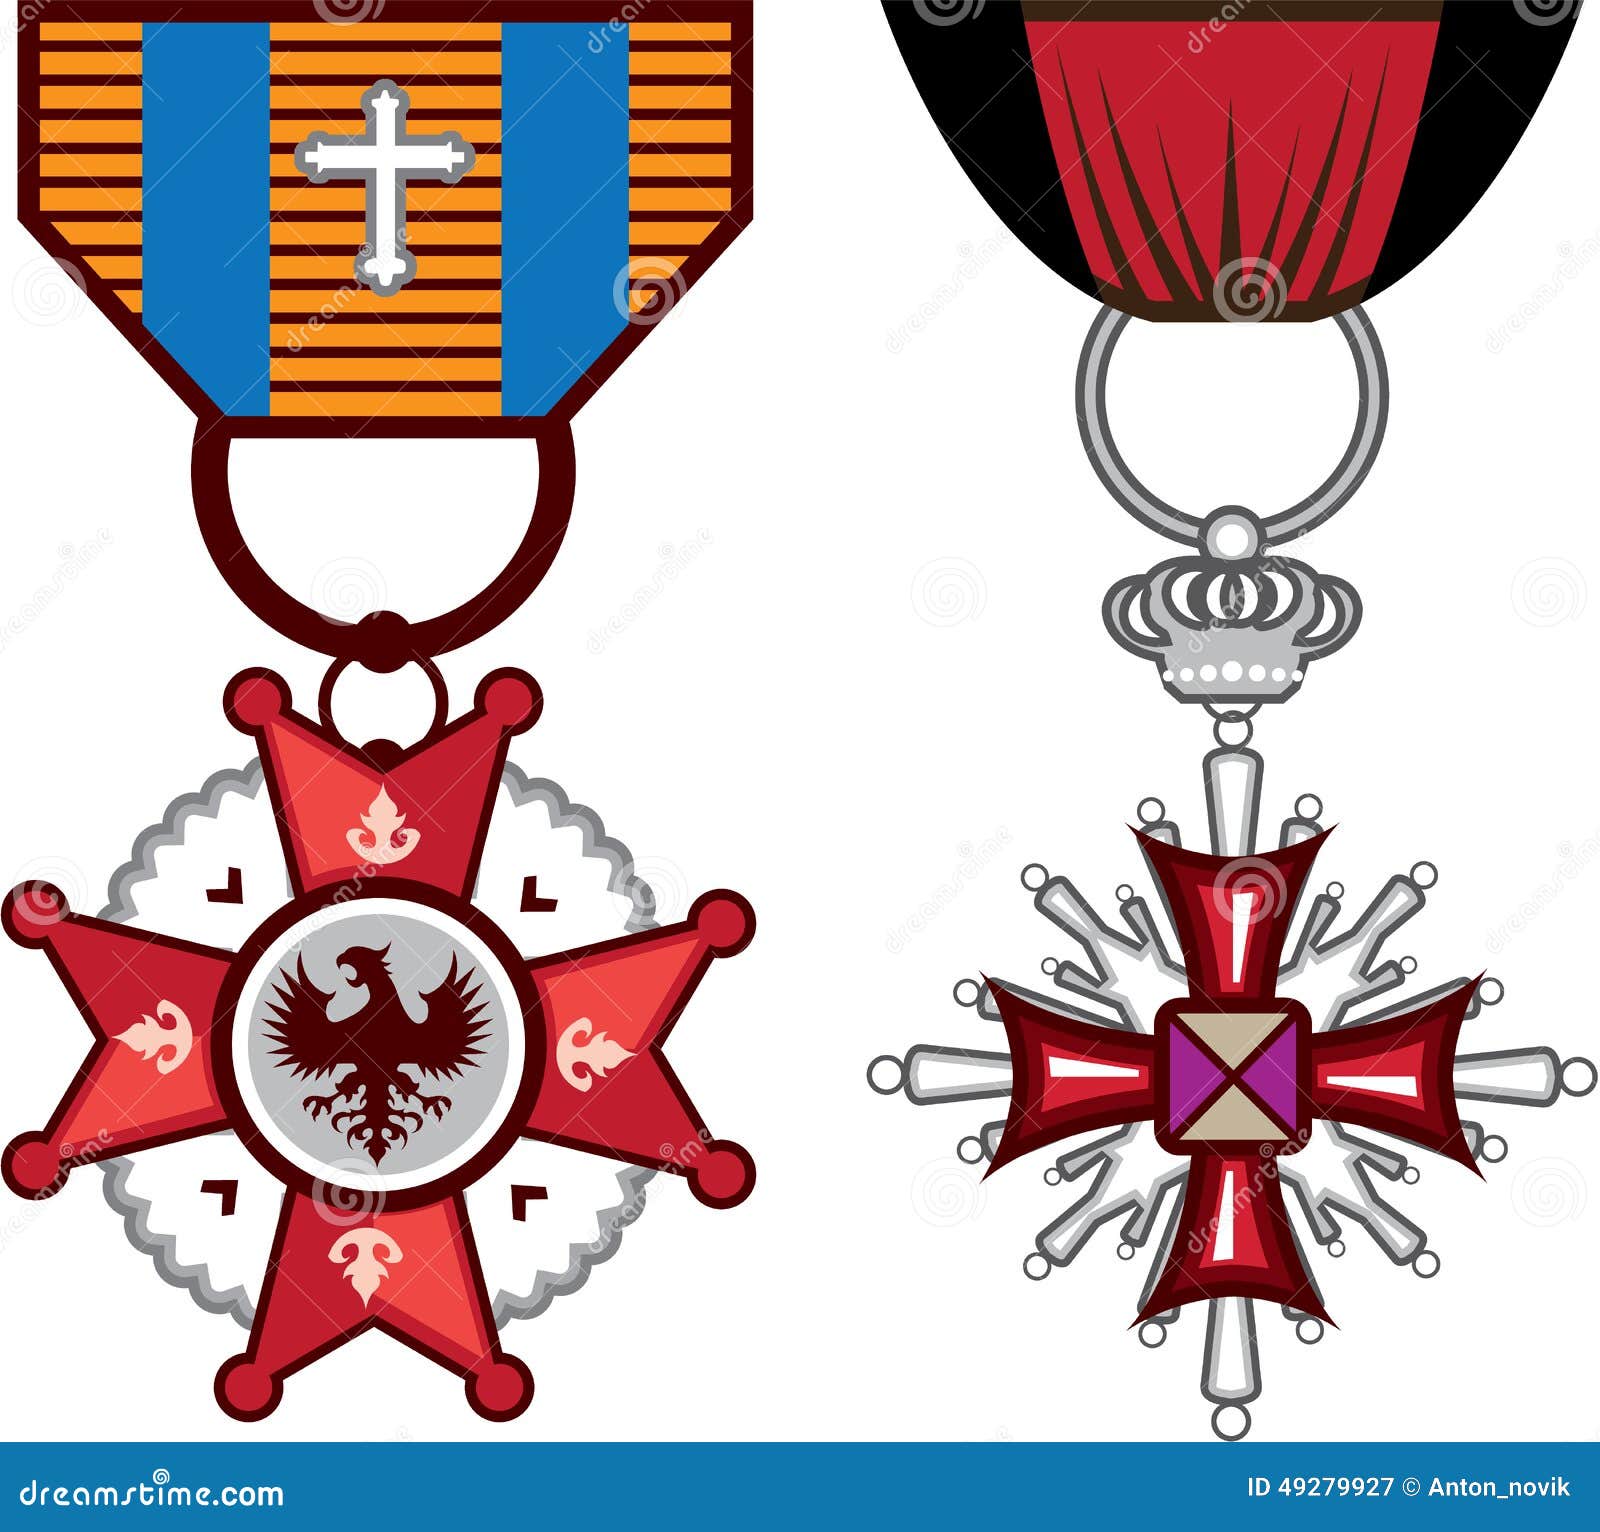 military medal clipart - photo #17